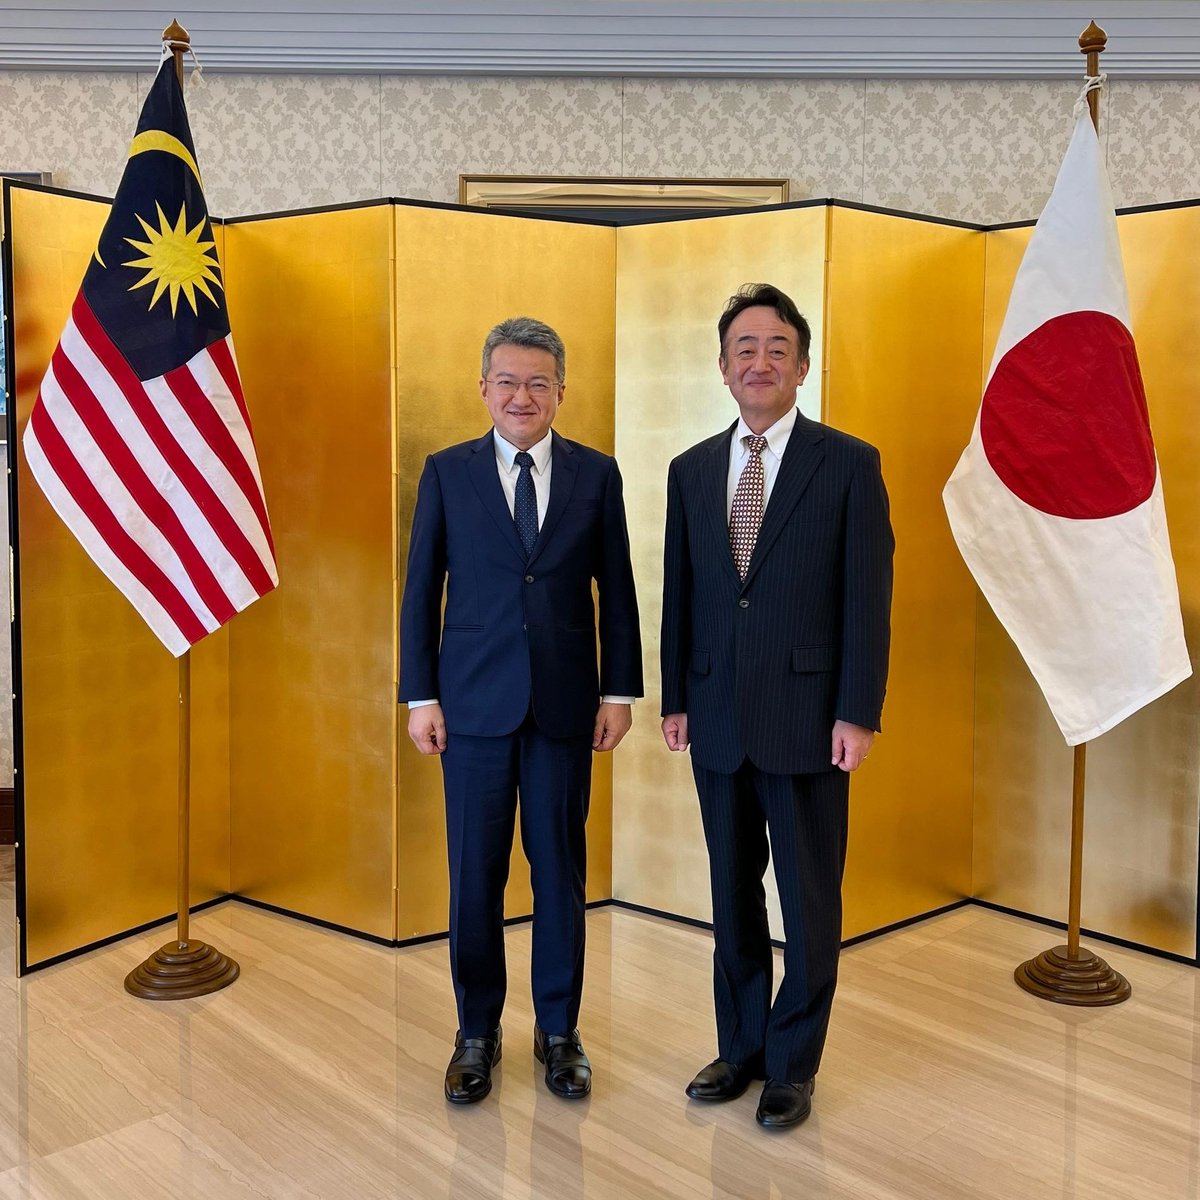 Had a pleasant meeting with HE Takahashi Katsuhiko, Japanese Ambassador to Malaysia to discuss trade and economic collaboration between 🇲🇾 and 🇯🇵, especially in new and emerging sectors.